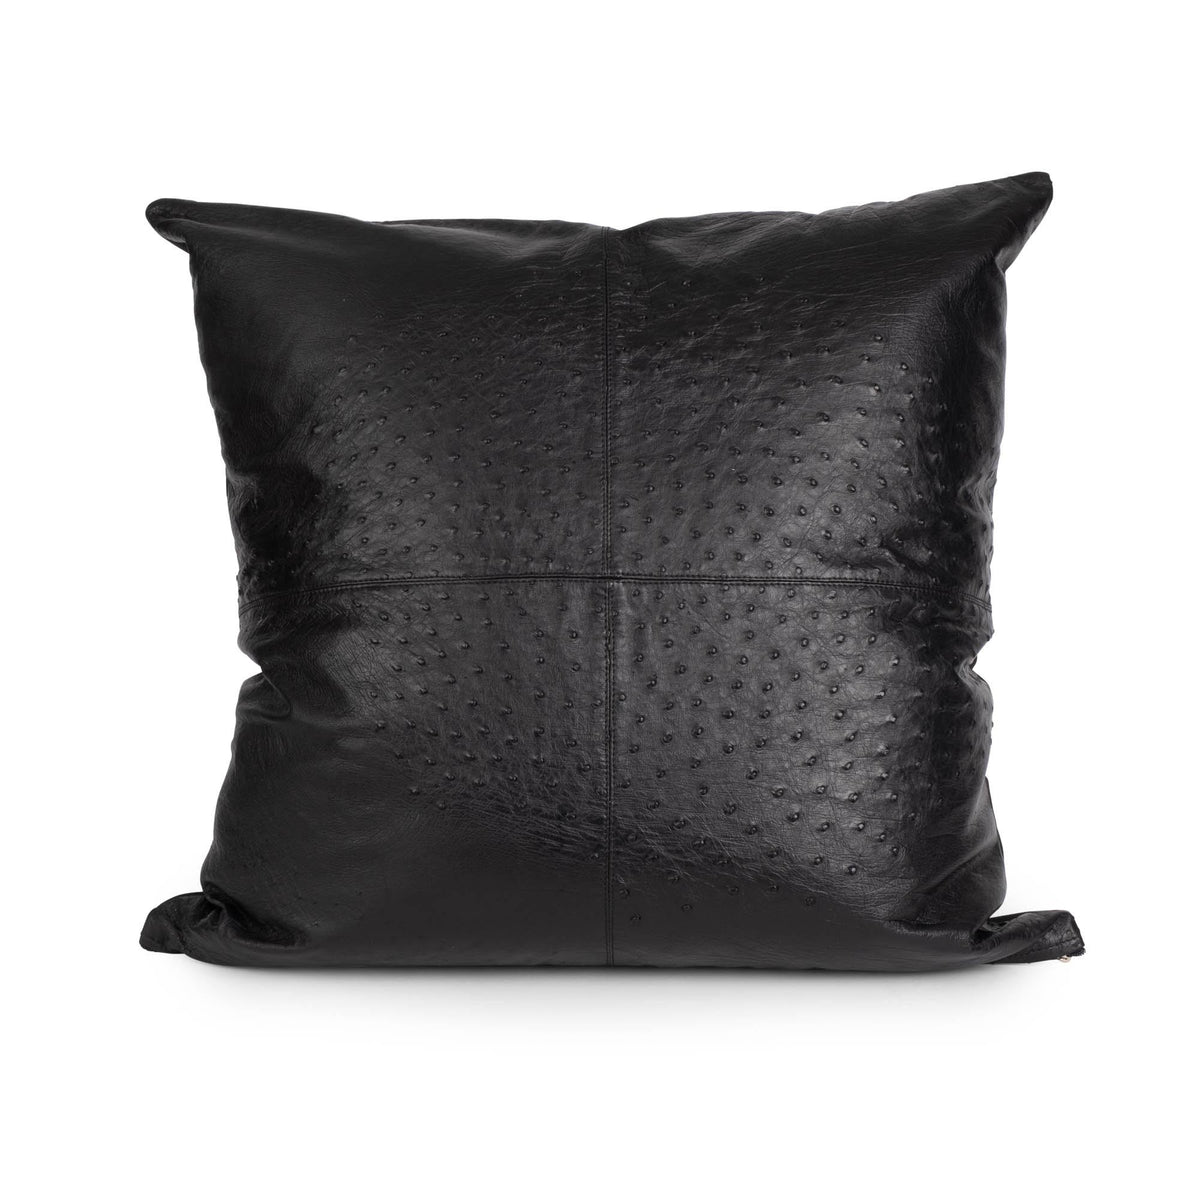 Ostrich Leather Inset Pillow with Feather Trim on Suede - Black